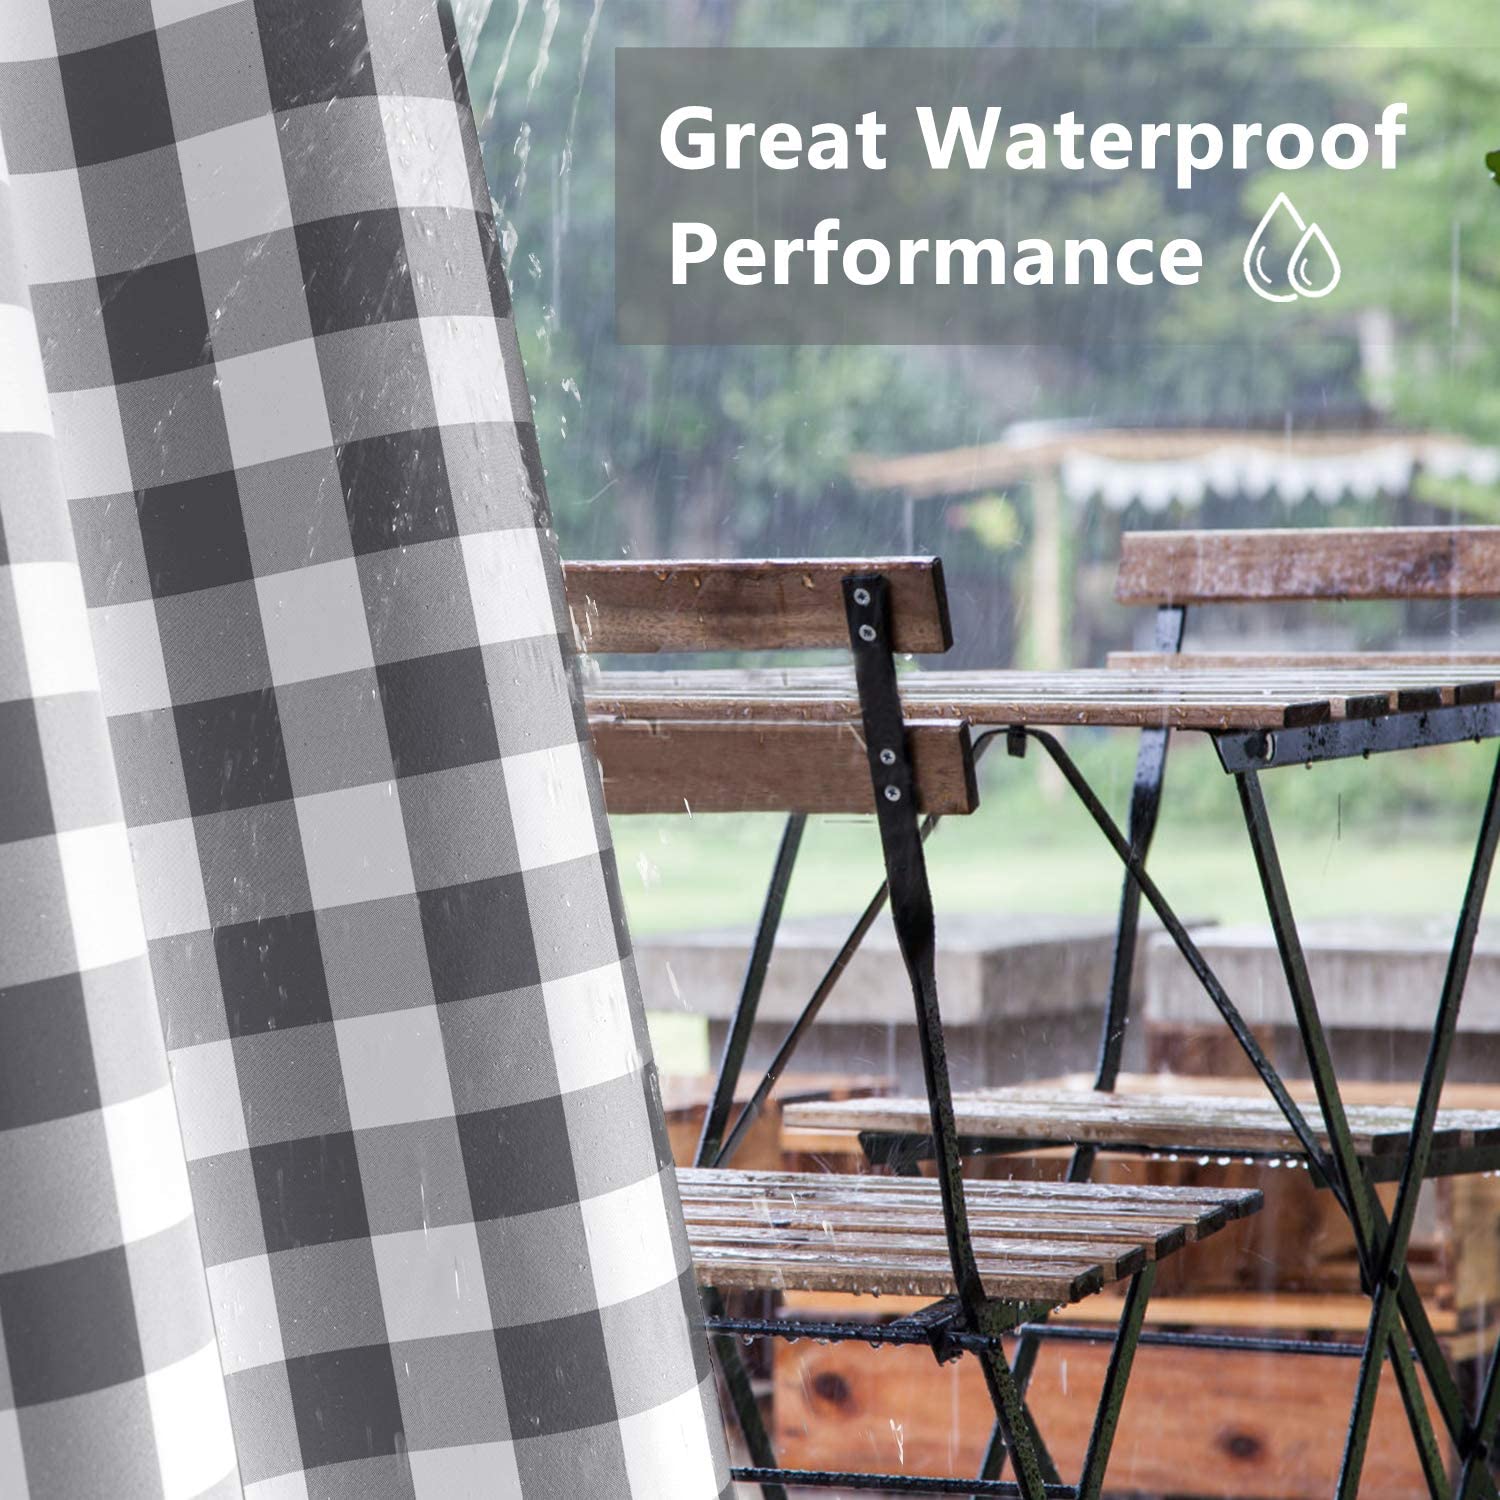 Porch Deck Waterproof Plaid Tab Top Outdoor Curtains 1 Panel KGORGE Store